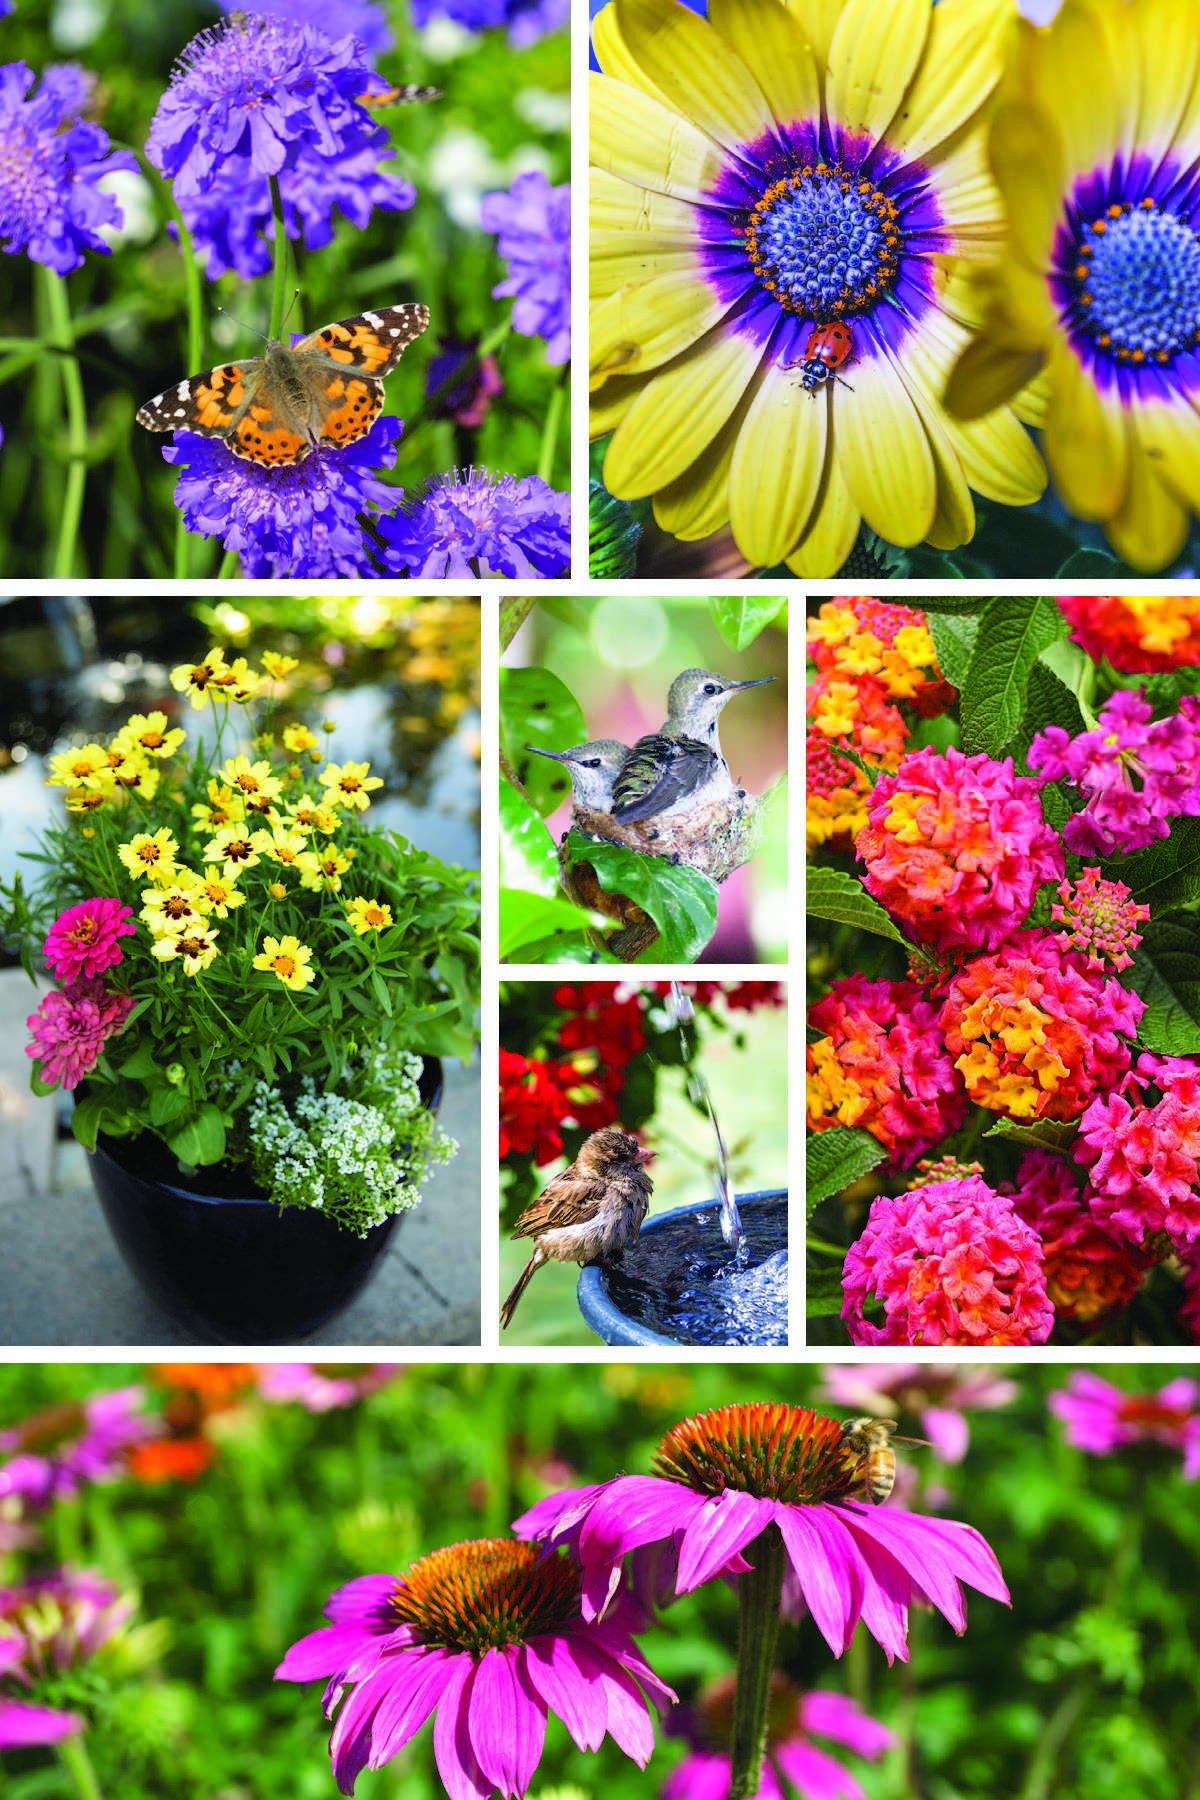 Collage of pollinator friendly flowers including Pincushion Flower, African Daisy, Coreopsis, Lantana and Coneflower